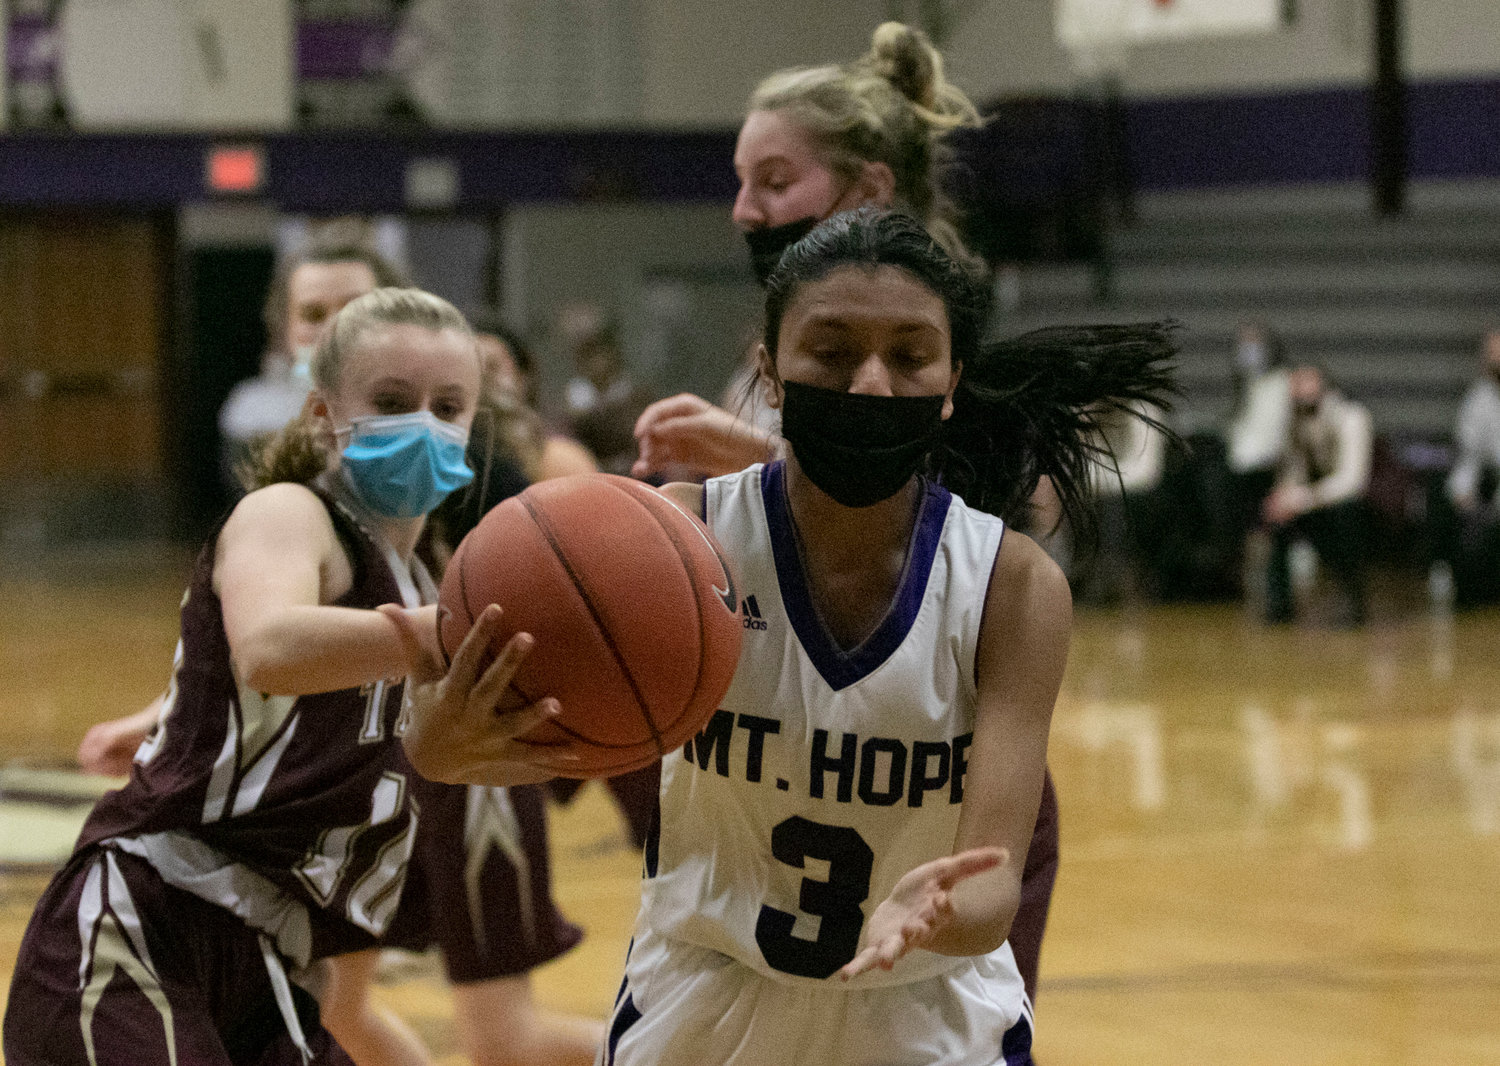 Aditi Mehta saves a Huskies possession and grabs the ball before it heads out of bounds.